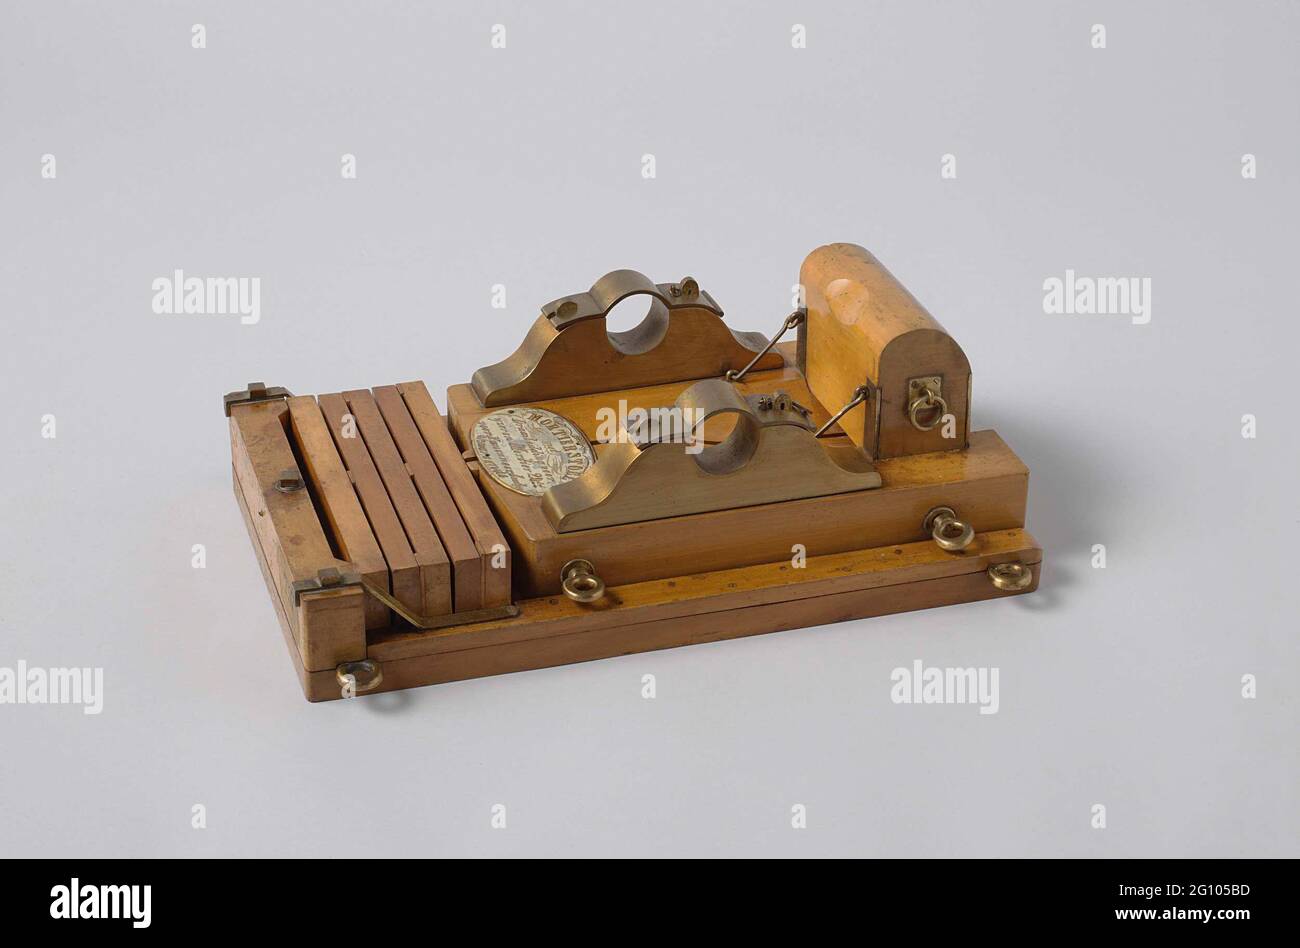 https://c8.alamy.com/comp/2G105BD/model-of-the-bed-or-a-20-cm-sea-service-mortar-on-a-pivotos-undercarriage-model-of-a-mortar-chair-for-mortar-of-20-inches-cm-on-turning-bed-the-spin-bed-consists-of-a-flat-wooden-plate-with-hole-for-the-spindle-bolt-in-the-middle-a-fixed-bucket-with-five-removable-beams-is-arranged-on-the-back-which-serve-as-a-buffer-for-collecting-the-recoil-little-bobbins-are-arranged-between-these-beams-turning-at-the-ends-or-in-the-middle-allowing-the-beams-the-seat-consists-of-two-parts-placed-in-a-layer-direction-and-has-tap-cushions-entirely-of-brass-a-trough-for-the-mortar-in-the-sacrifice-a-2G105BD.jpg